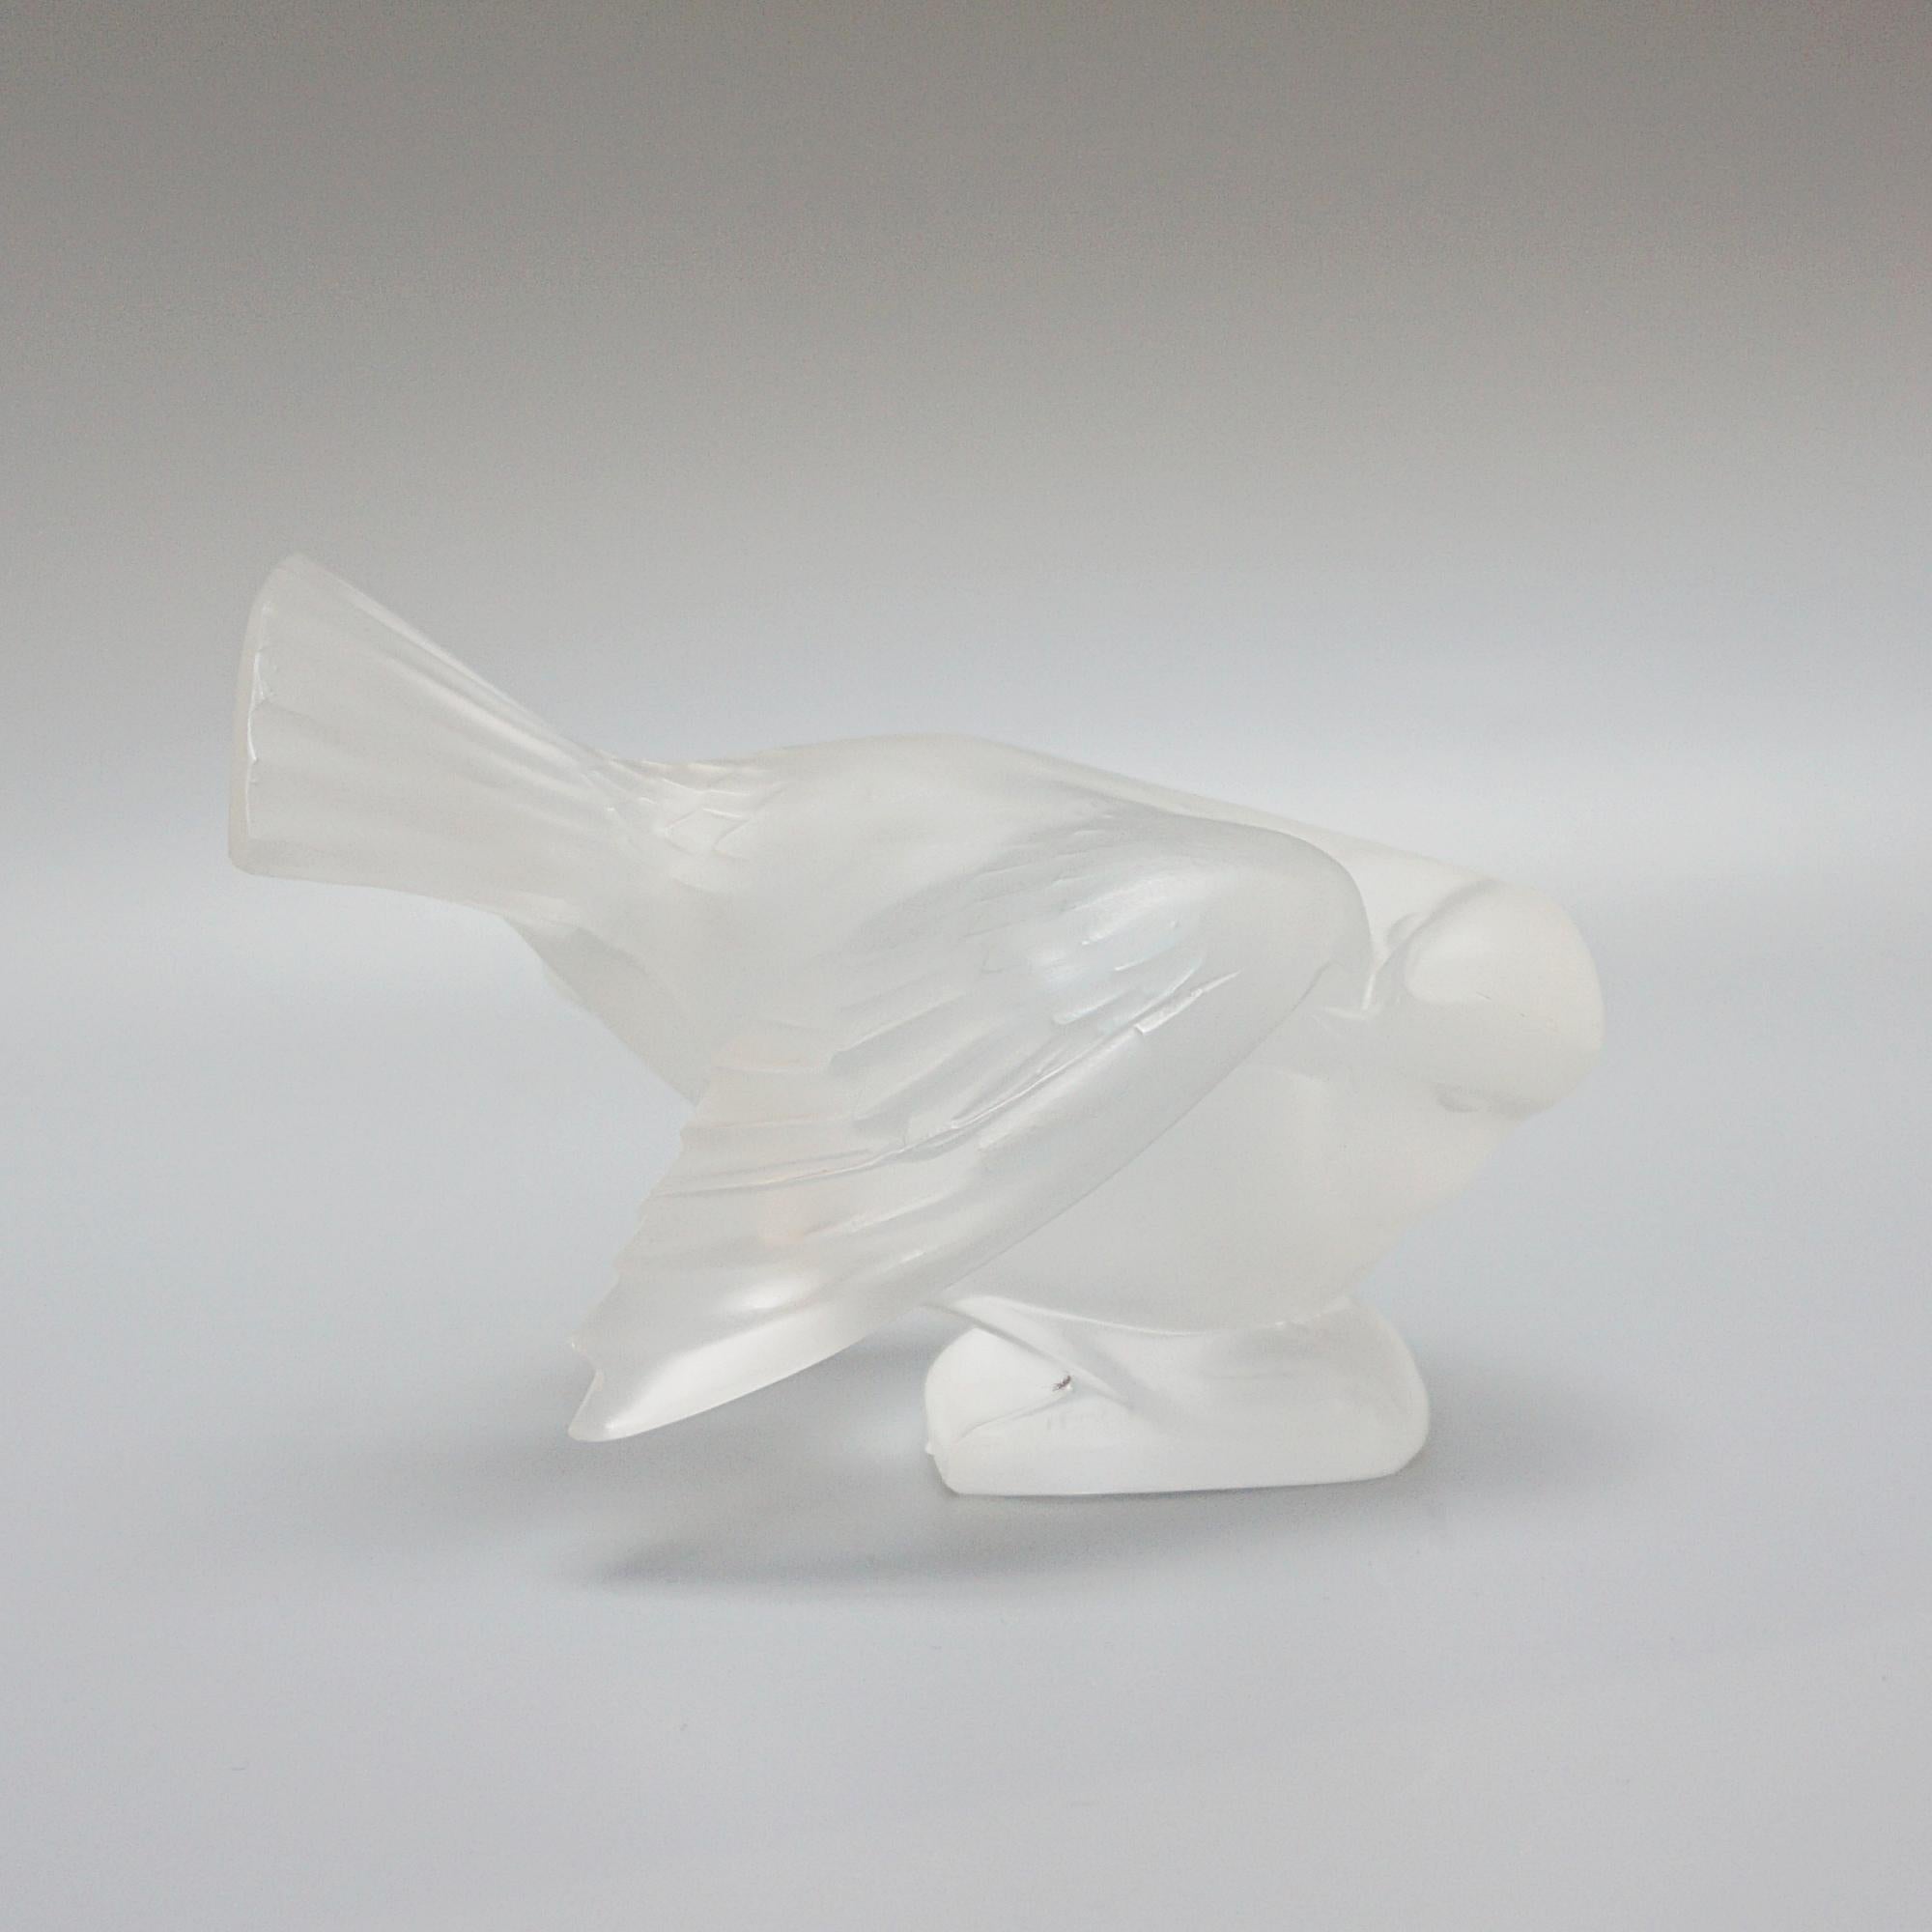 French 'Moineau Coquet' A Glass Bird Paperweight by Marc Lalique (1900 - 1977) For Sale